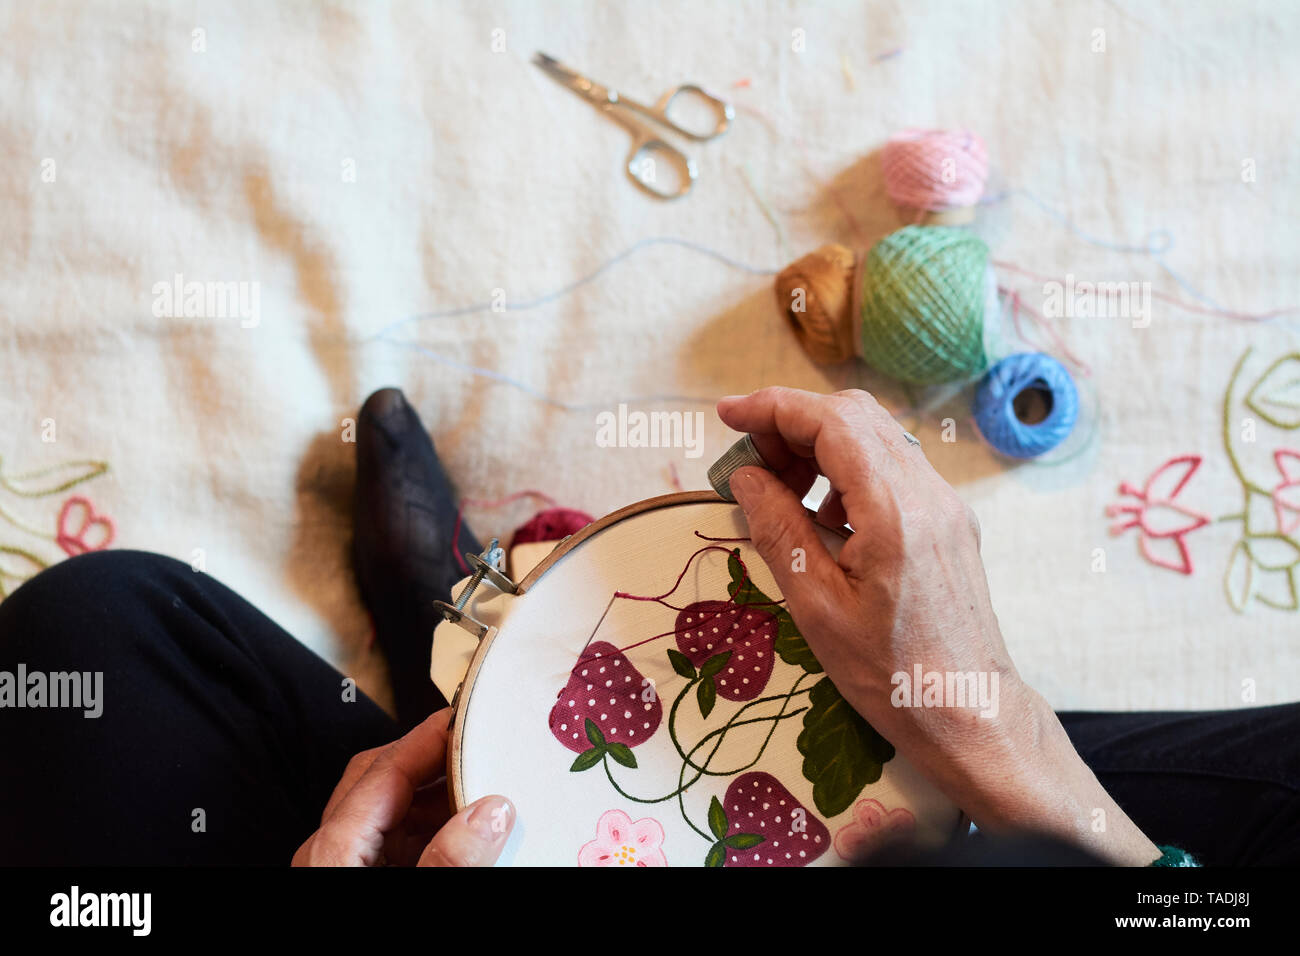 Close-up of woman embroidering strawberry pattern Stock Photo